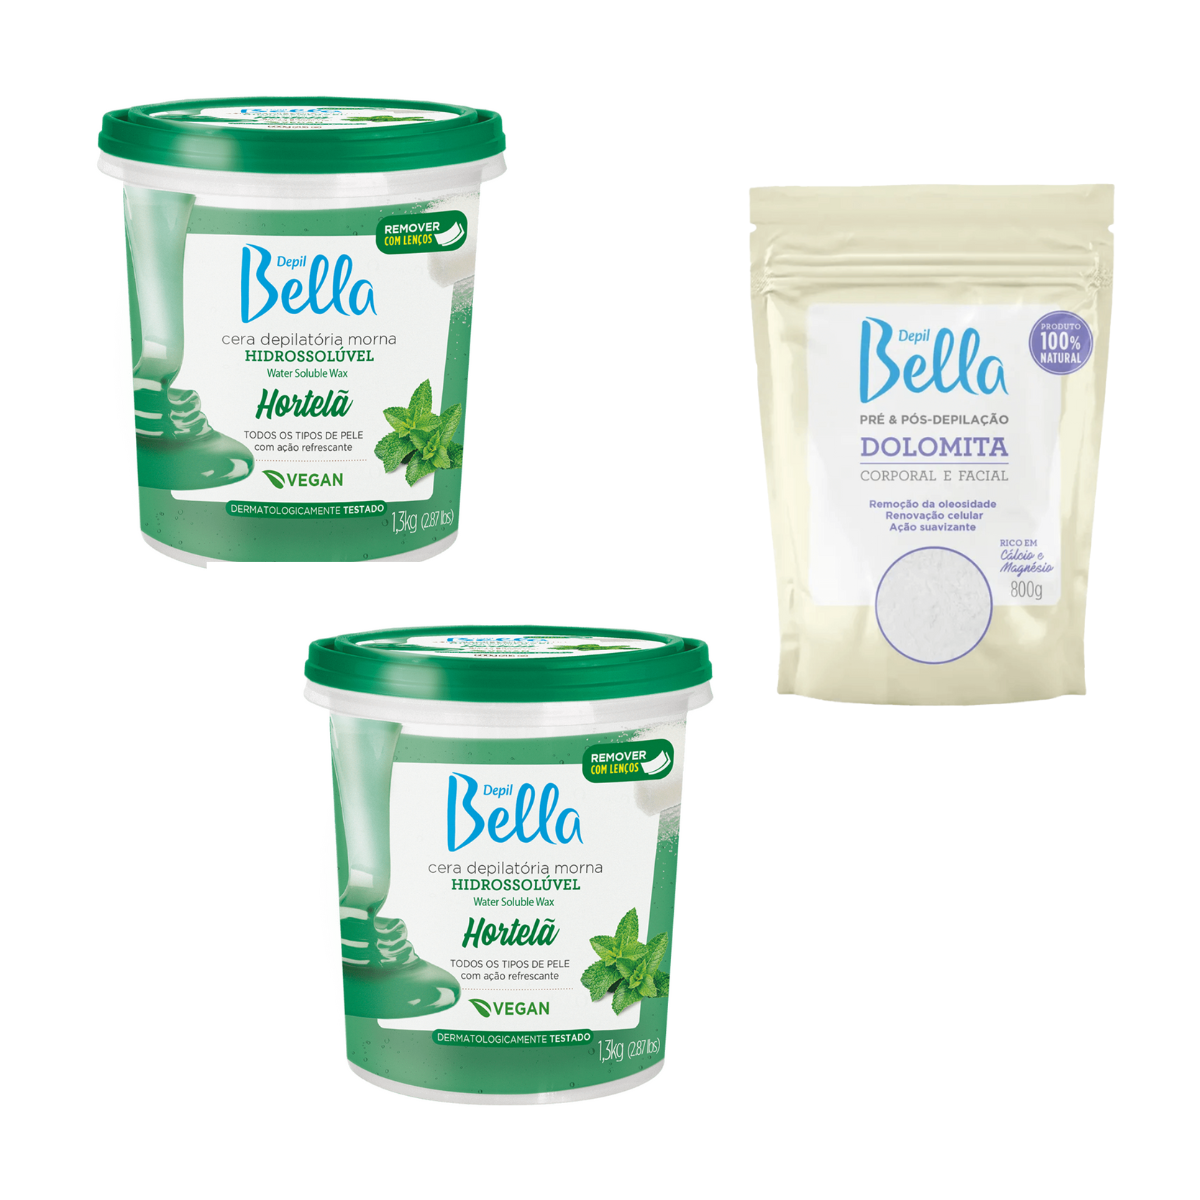 Depil Bella Bundle 2 Full Body Sugar Wax Mint Hair removal, and 1 Dolomite Powder, 100% natural, vegan, for all skin types. - depilcompany